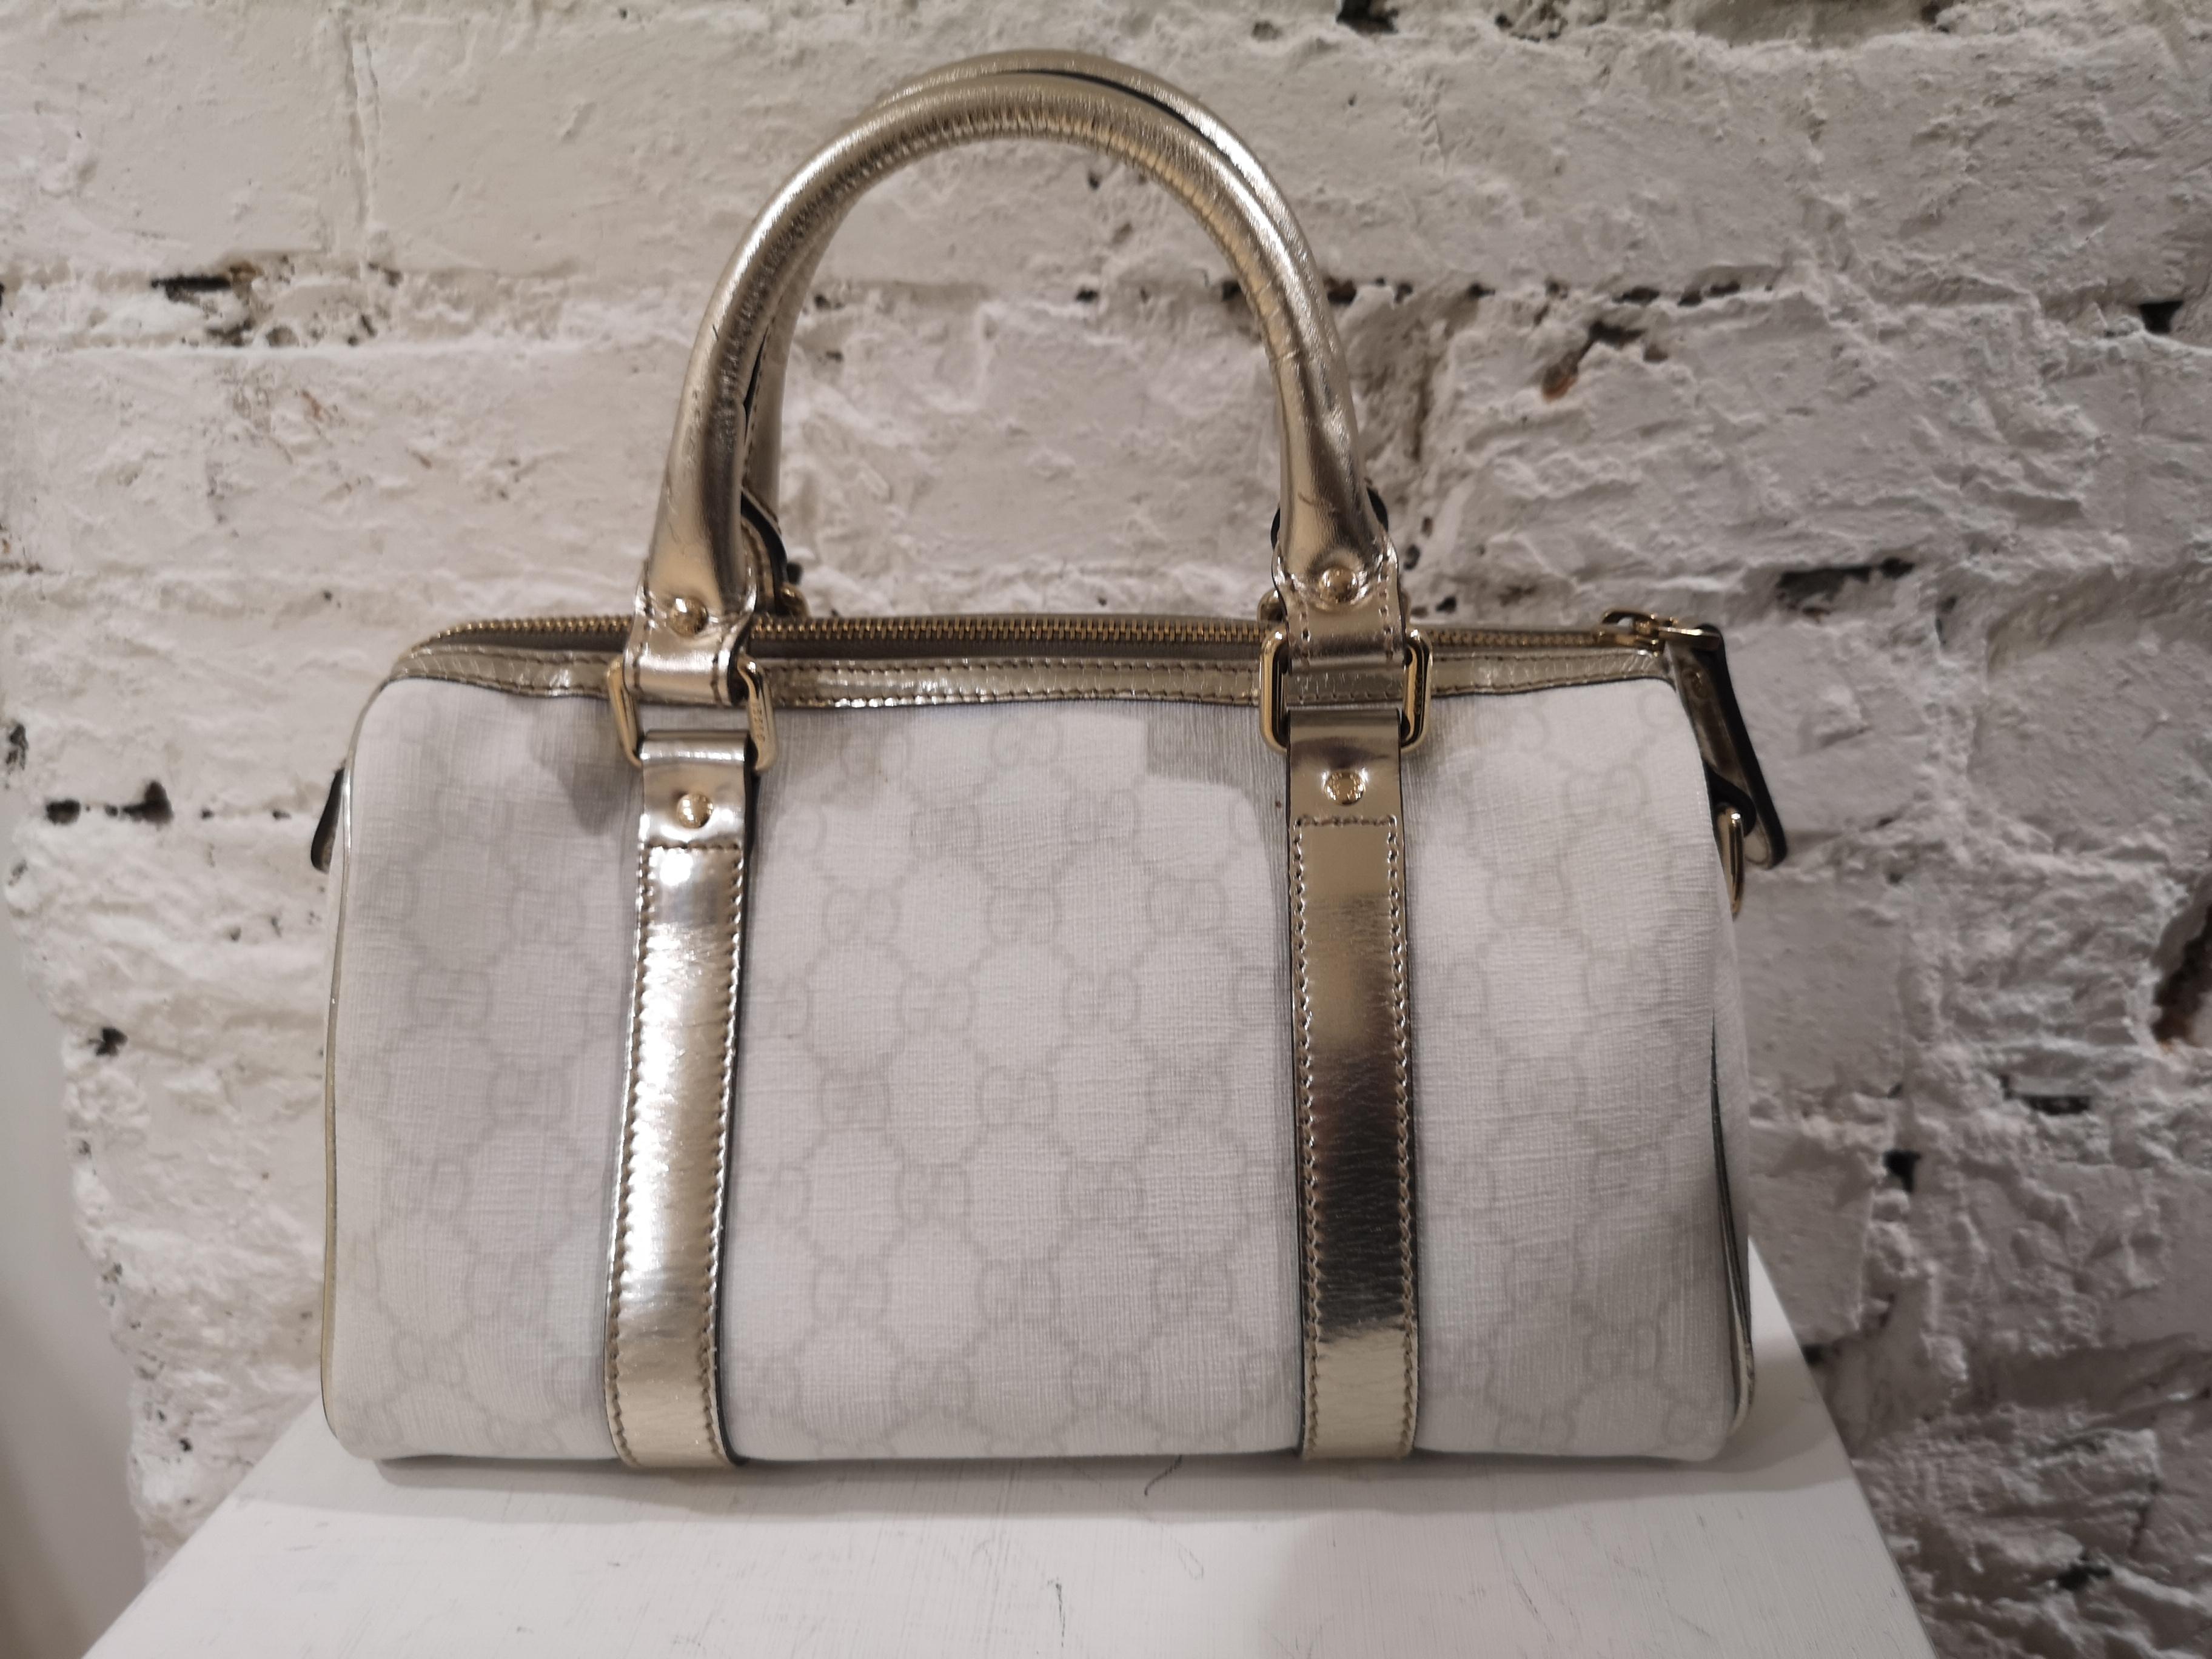 Gucci white gold leather hardware speedy case bag
totally made in italy